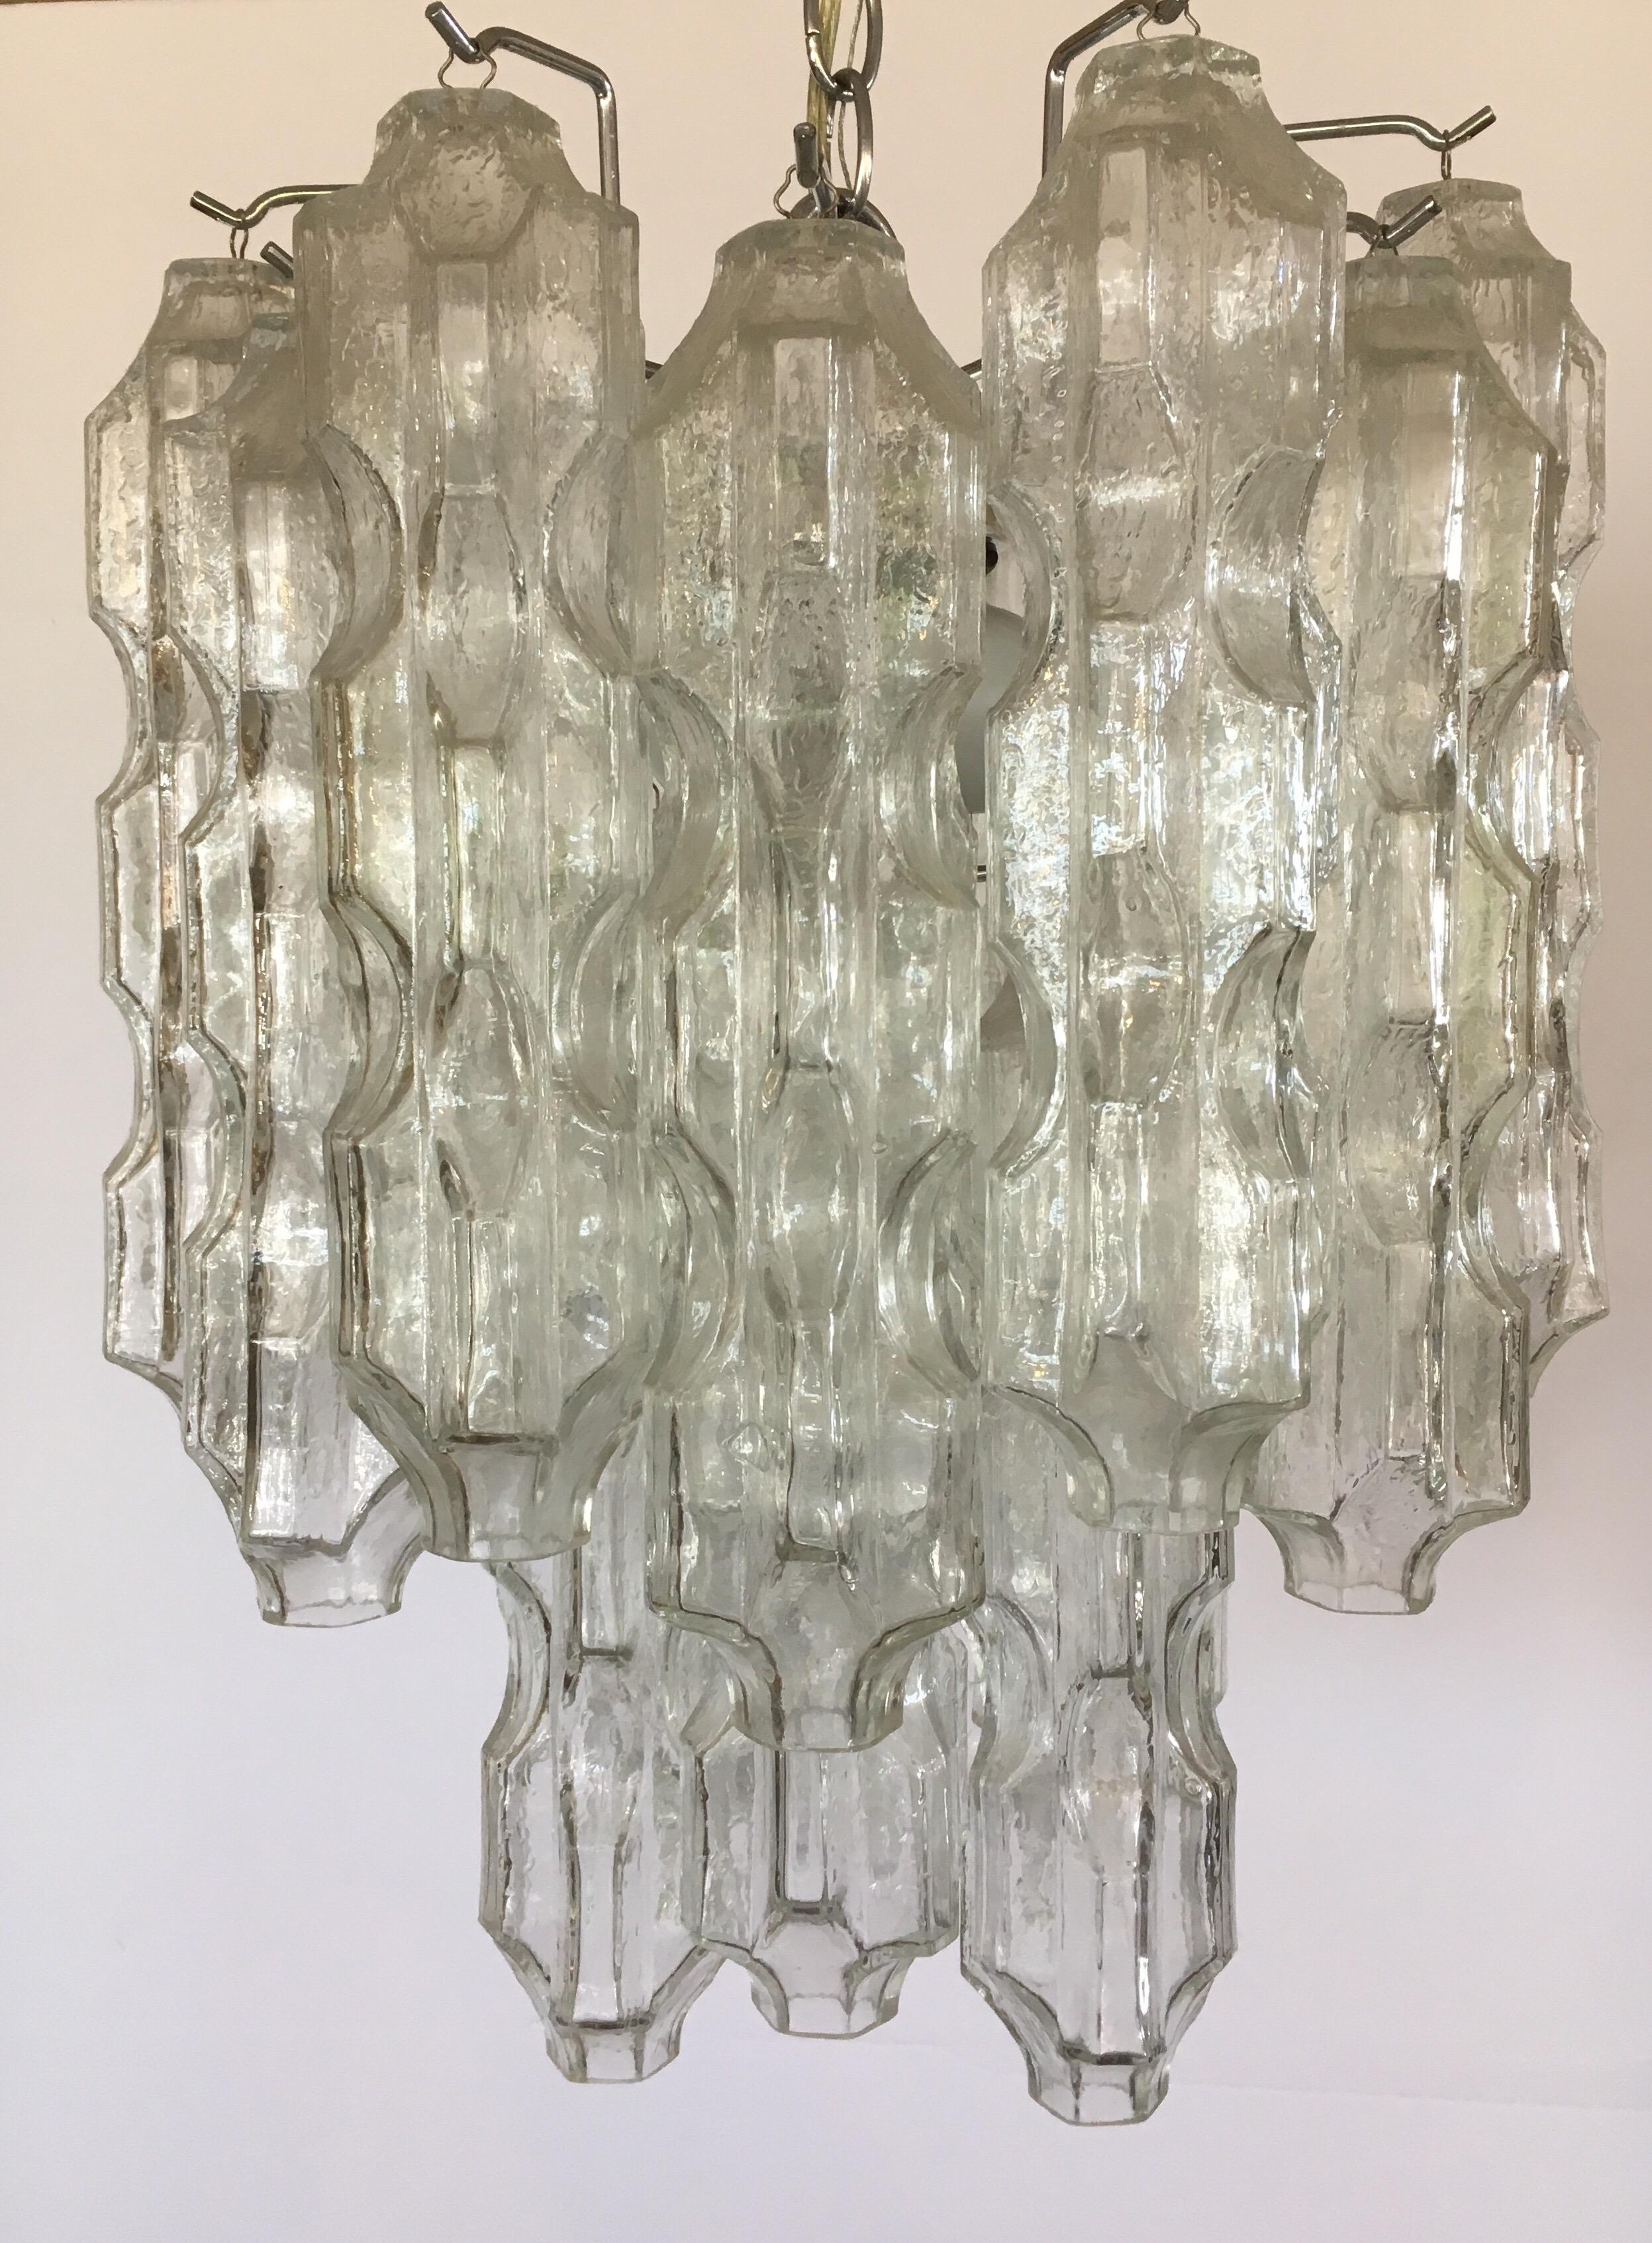 Magnificent Venini 1960s Murano glass tubular chandelier. Made in Italy and features textured tubular Murano glass cylinders that hang individually. Nothing short of spectacular. Three light sockets in the interior and wired for USA and in perfect